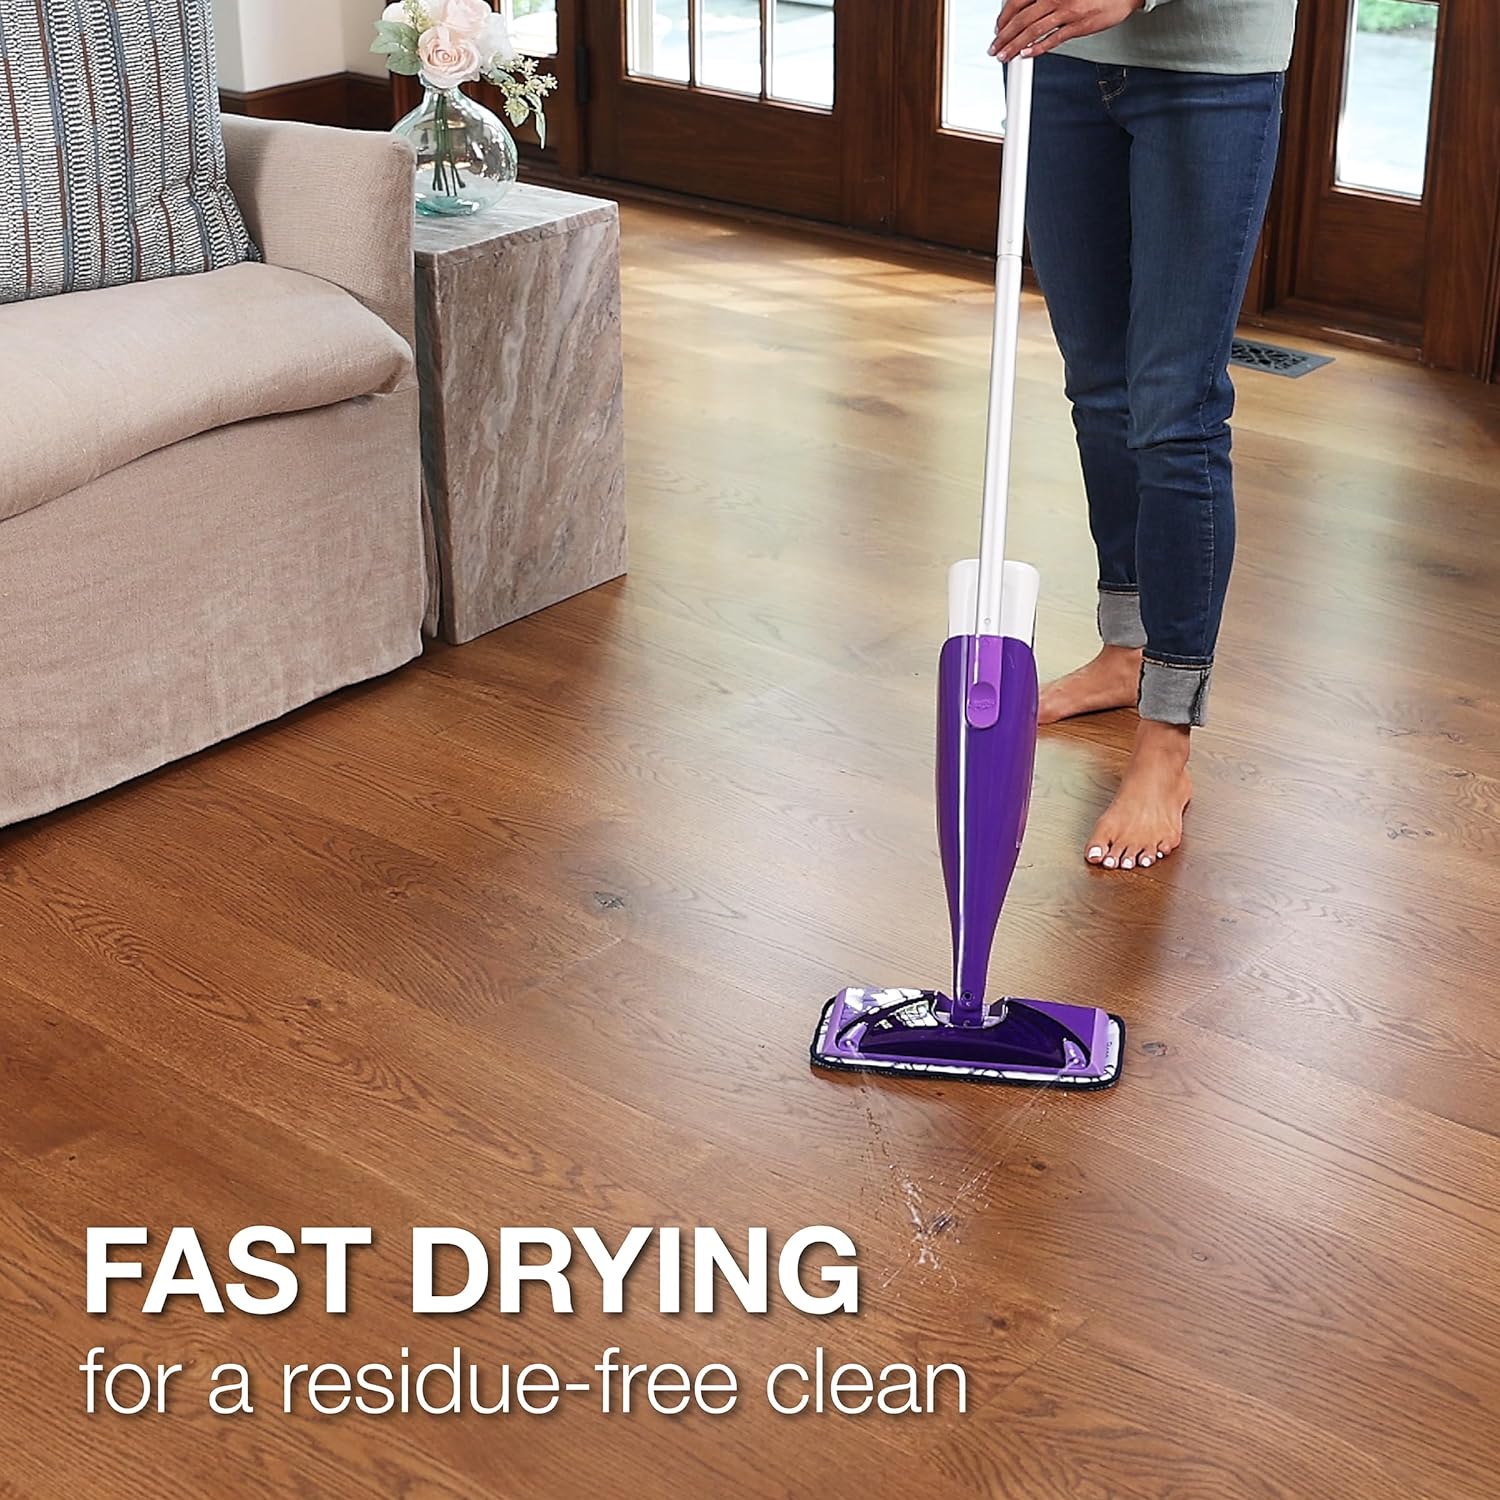 Bona Hardwood Floor Cleaner Bottle for use with Swiffer WETJET Spray Mop, Lavender Thyme Scent, makes 64 Fl Oz - Includes Filled Bottle + Concentrate Refill for Wood Floor Cleaning : Health & Household